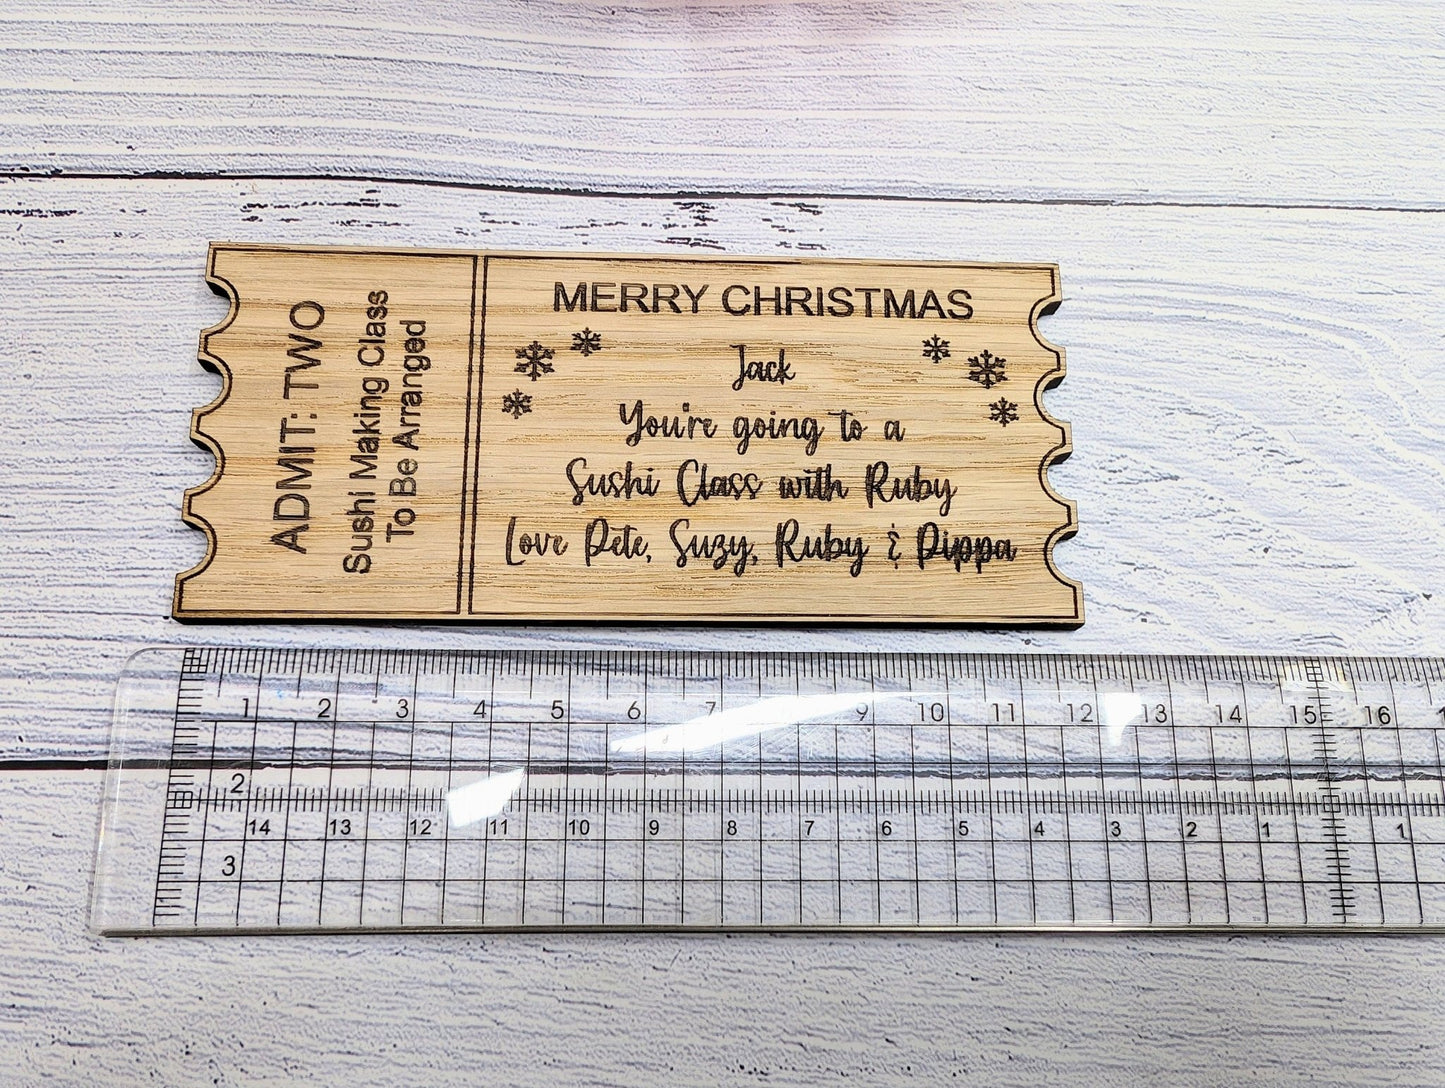 Personalised Christmas Magic Ticket in Oak Veneer - Custom Gift Experience Voucher - Memorable Keepsake for Special Occasions | 3 Sizes - CherryGroveCraft